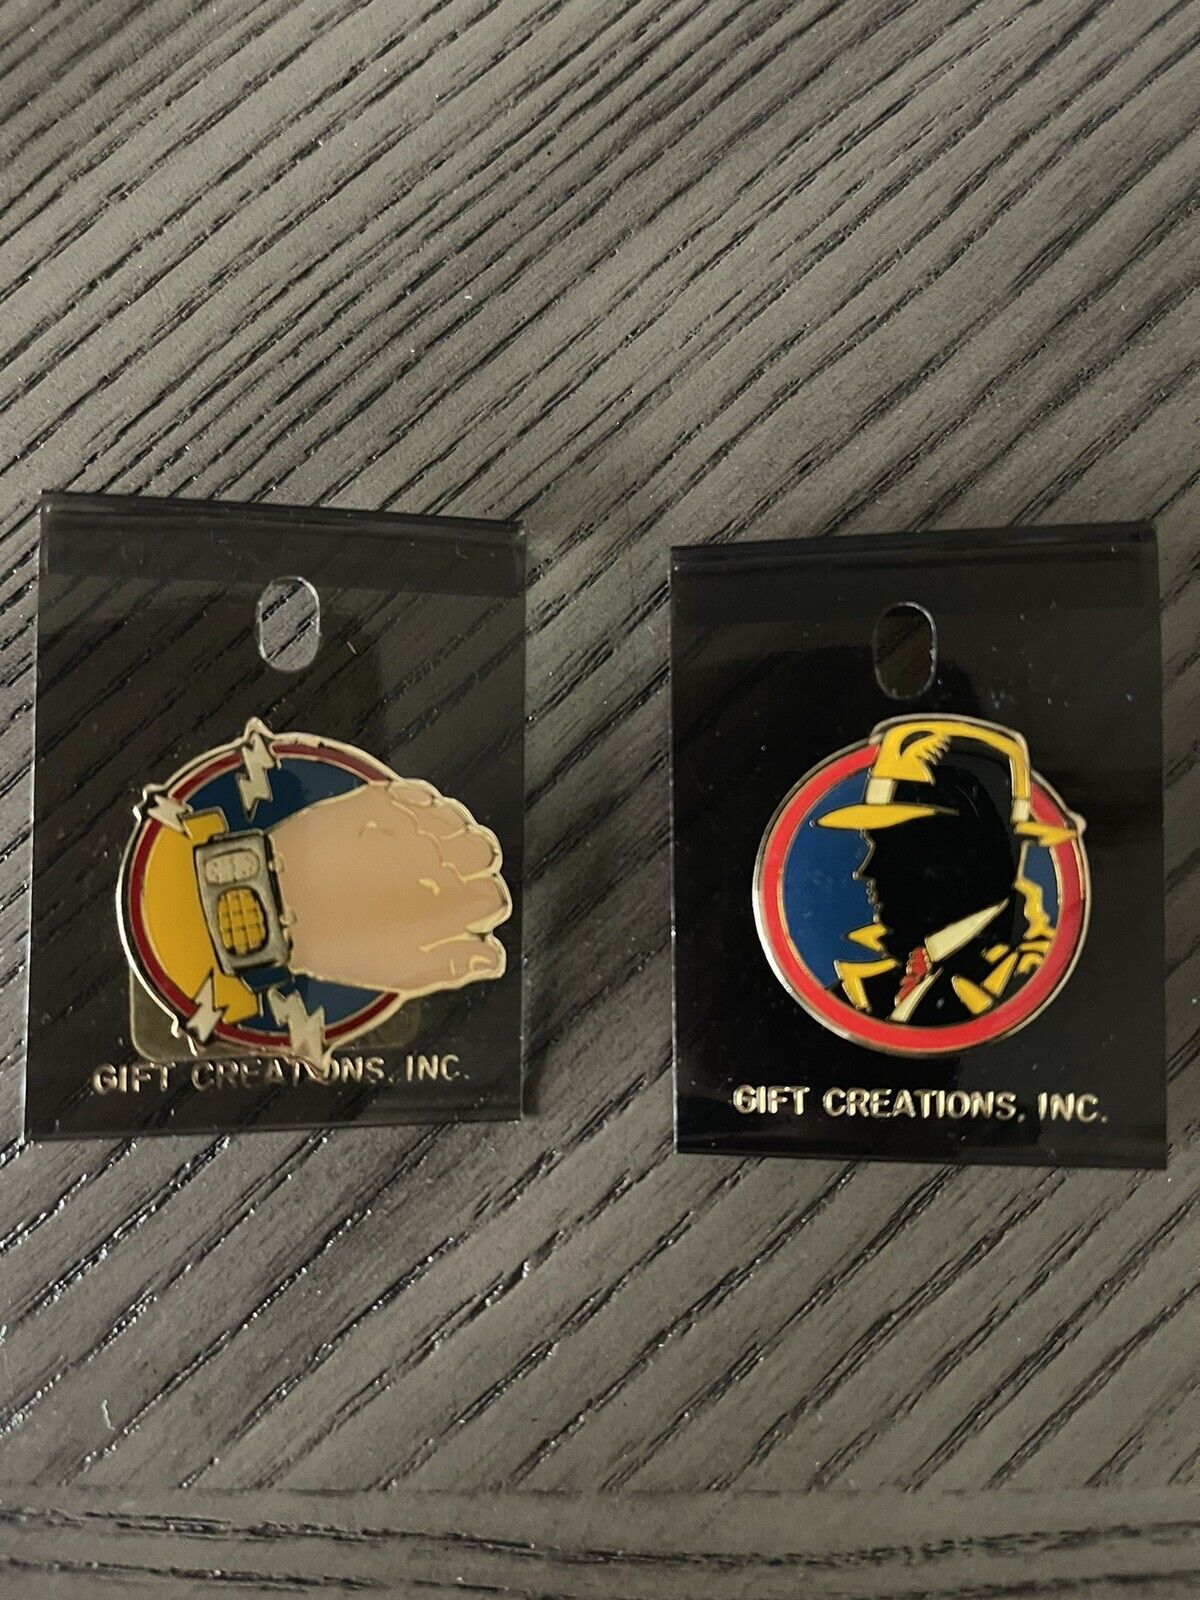 VTG Disney Dick Tracy ￼& Wrist Watch Enamel Trading Pins by Gift Creations